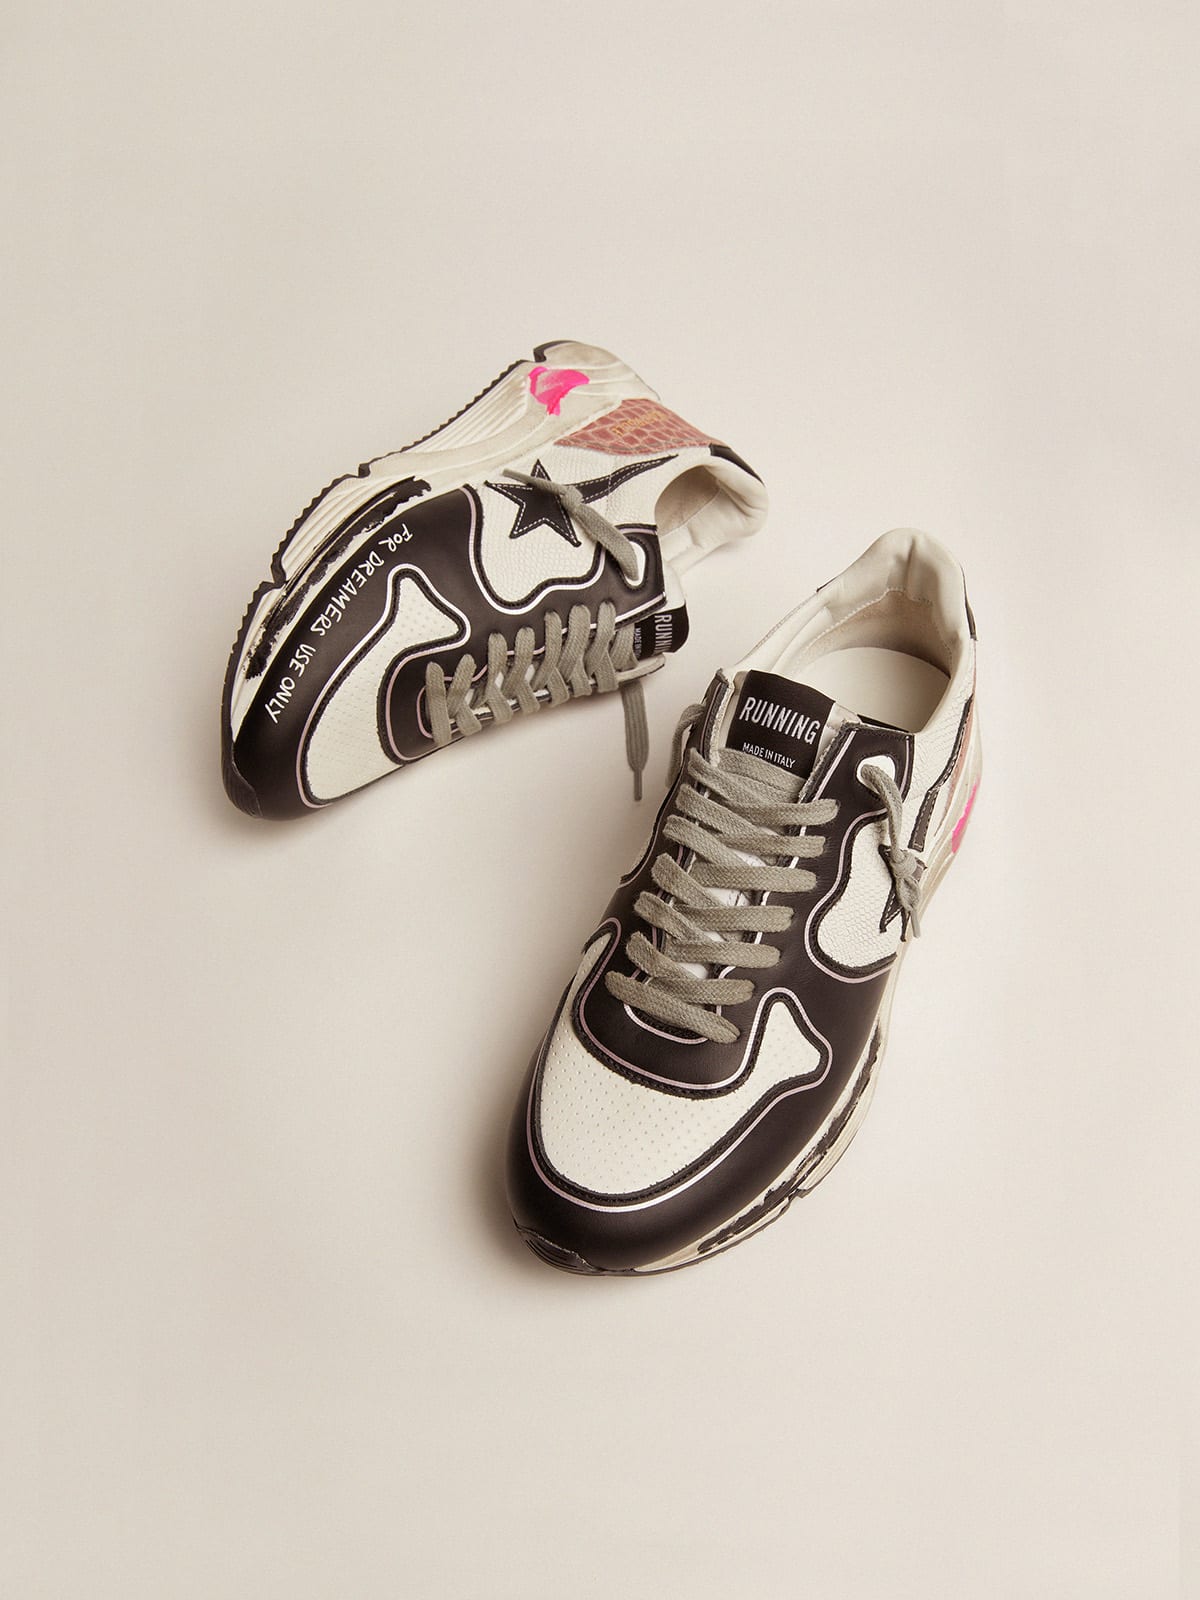 Golden Goose - Running Sole sneakers in white snake-print leather with contrasting black details in 